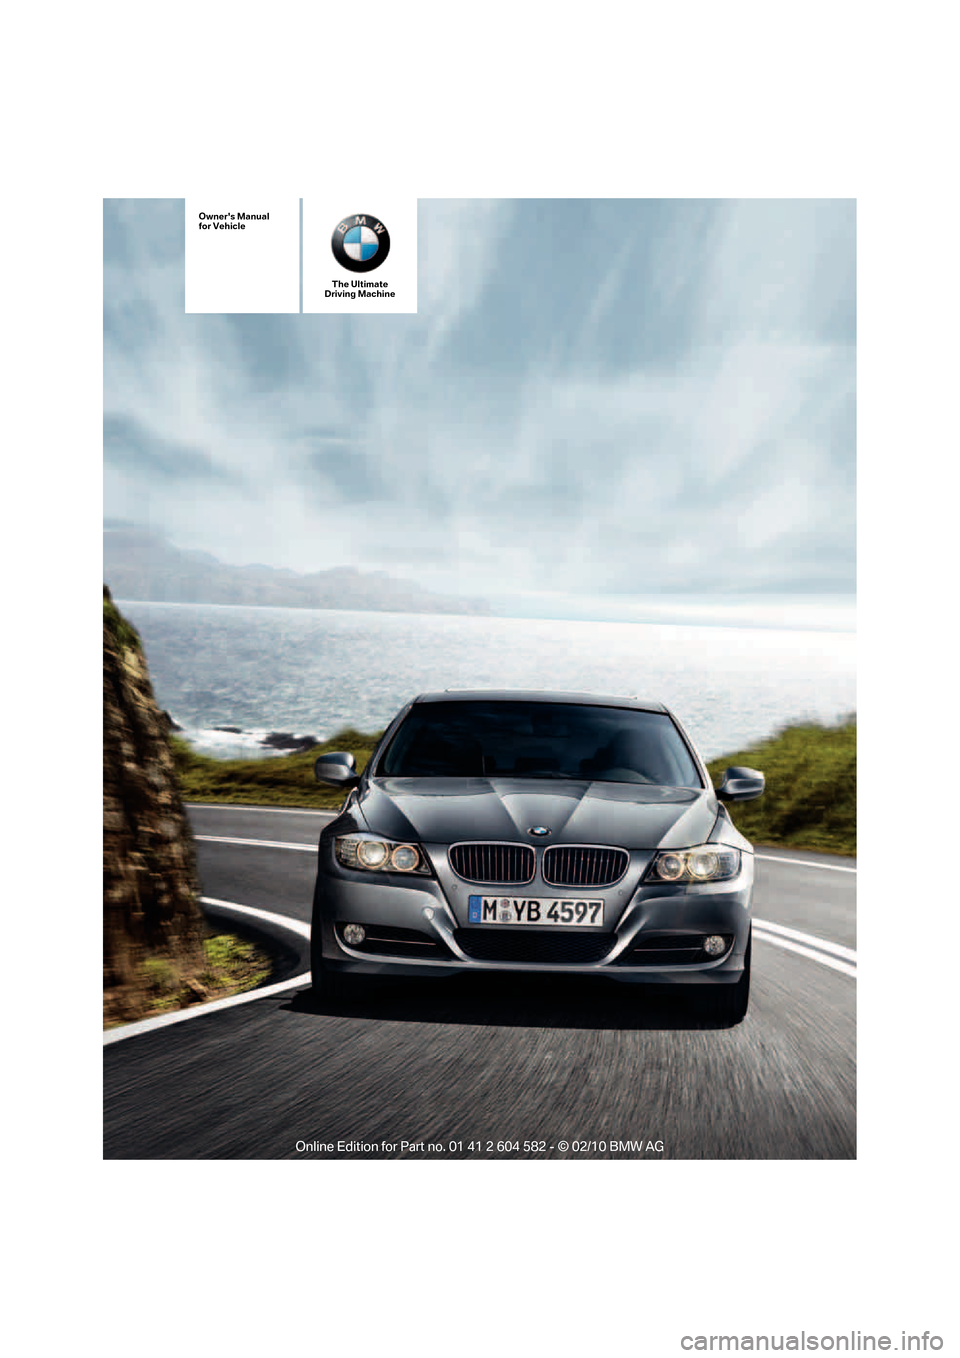 BMW 335D 2011 E90 Owners Manual The Ultimate
Driving Machine
Owners Manual
for Vehicle 